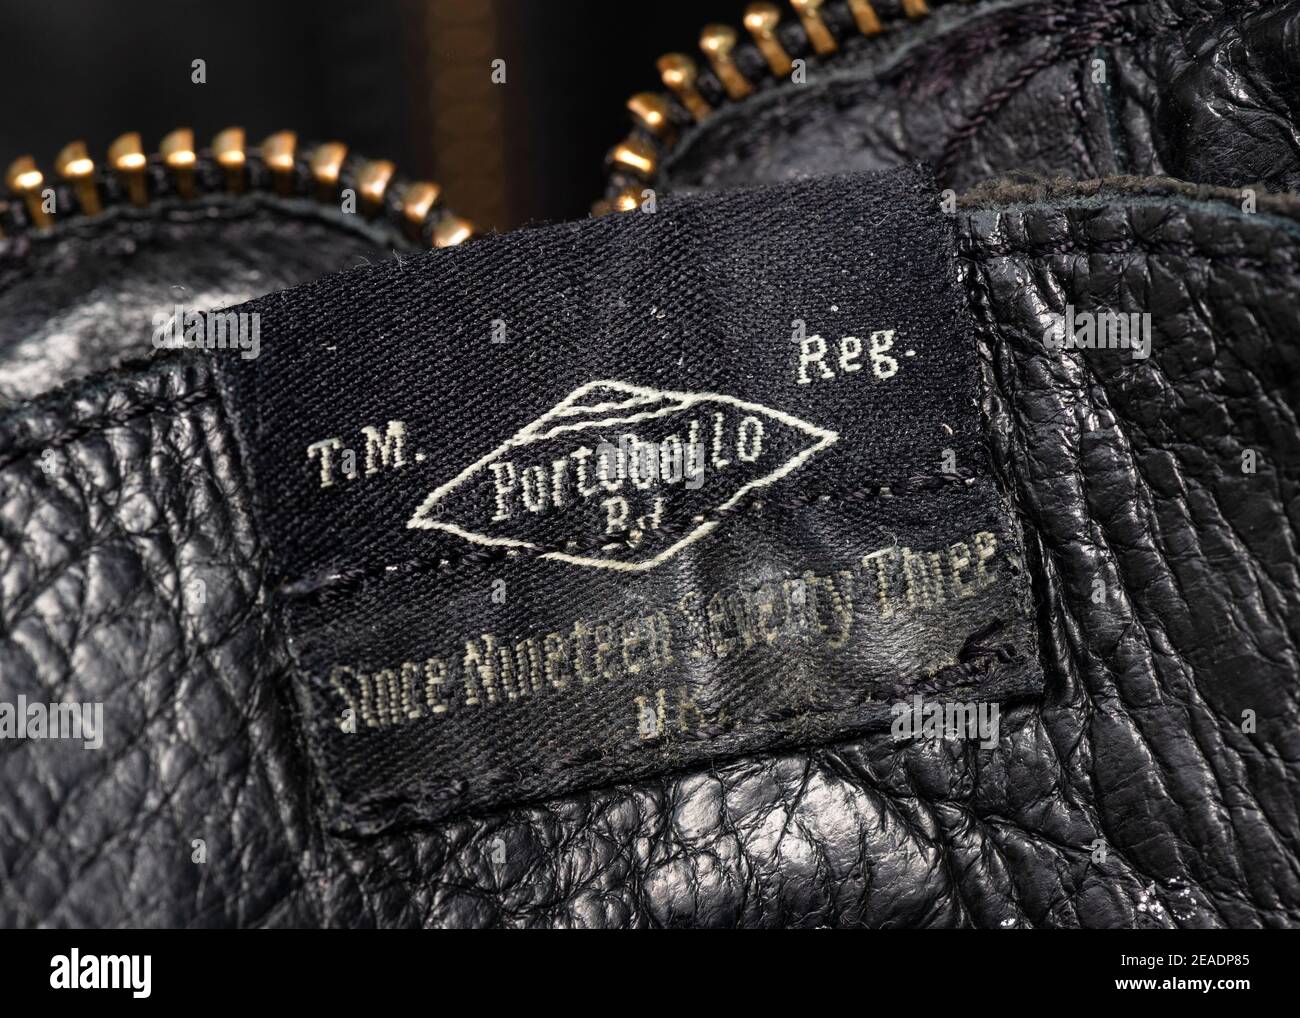 Portobello Rd. vintage worn out label on Pepe Jeans black leather men's  boots close up detail Stock Photo - Alamy